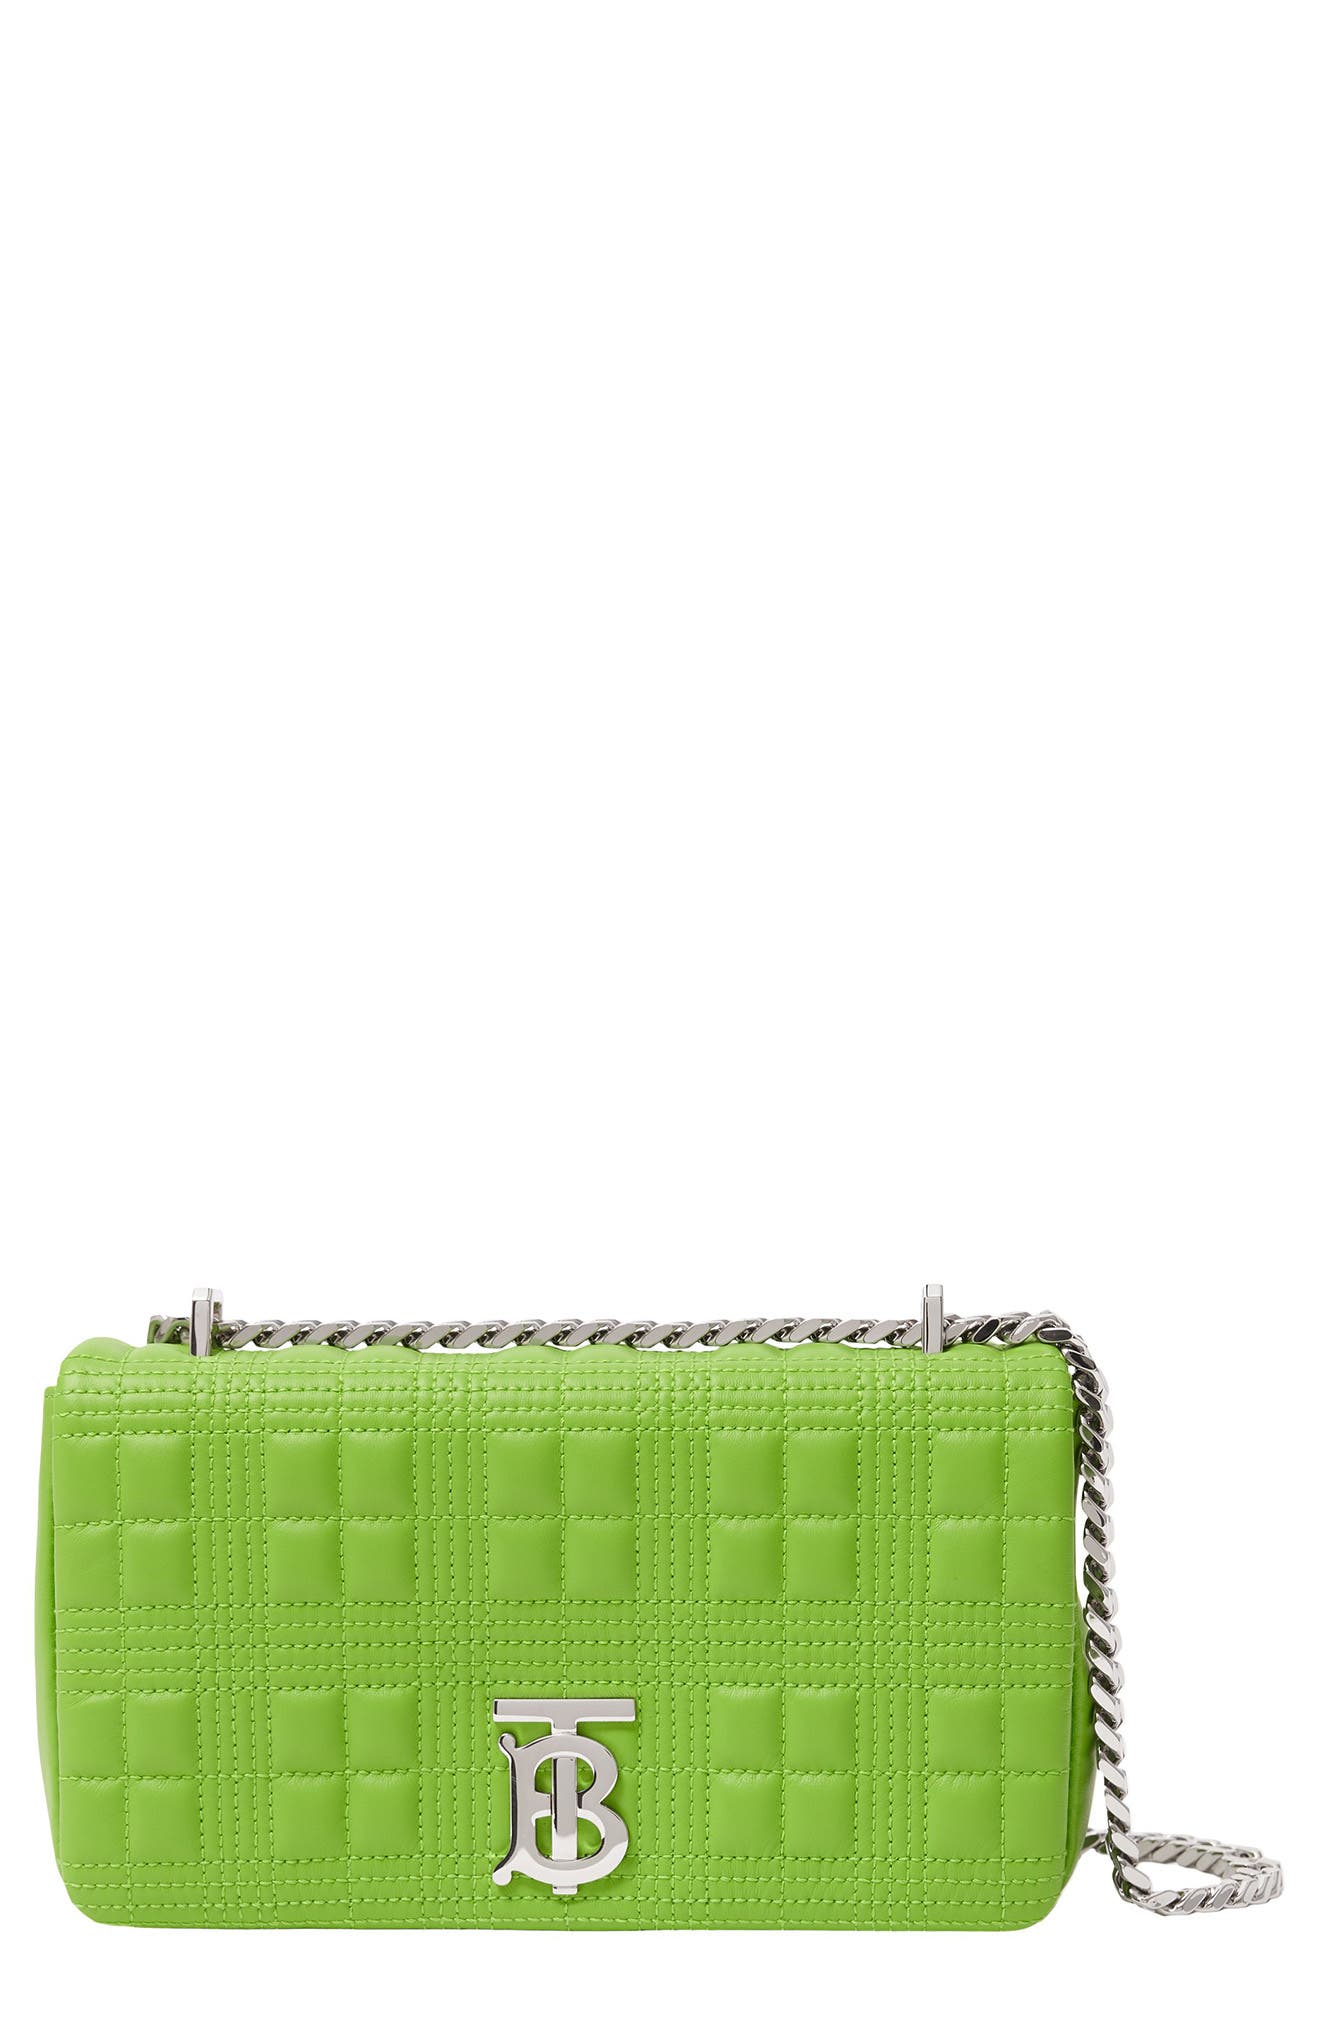 Burberry Small Lola Quilted Leather Shoulder Bag in Brilliant Green at Nordstrom